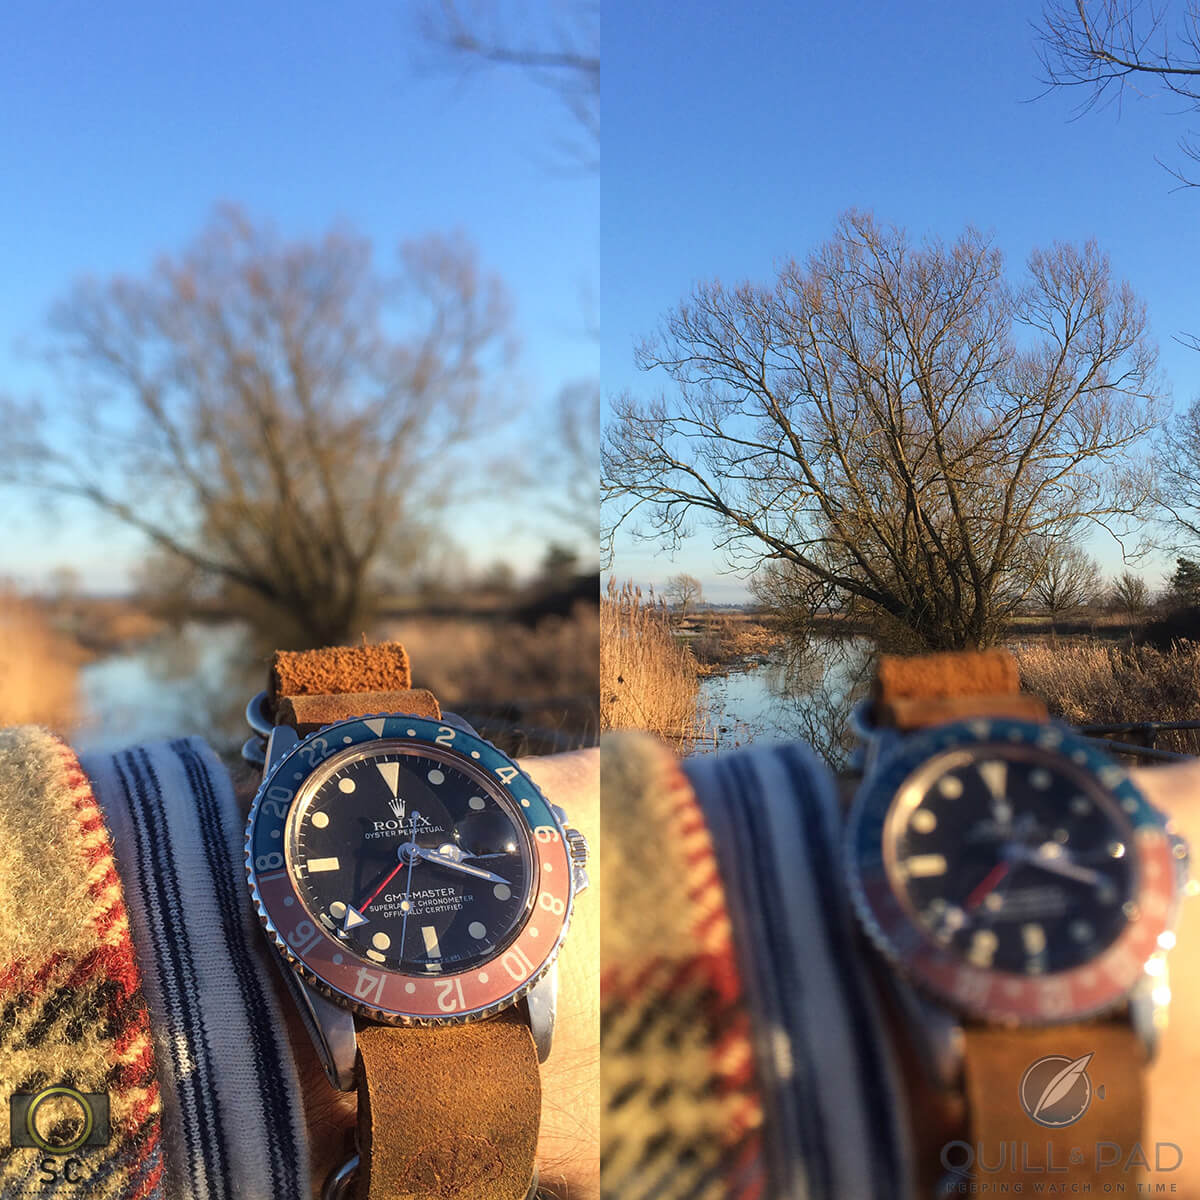 This is a typical Simon Cudd photo collage, with emphasis on both the watch and the landscape, of his favorite watch: a Rolex GMT-Master “Pepsi” from 1973, the year of his birth